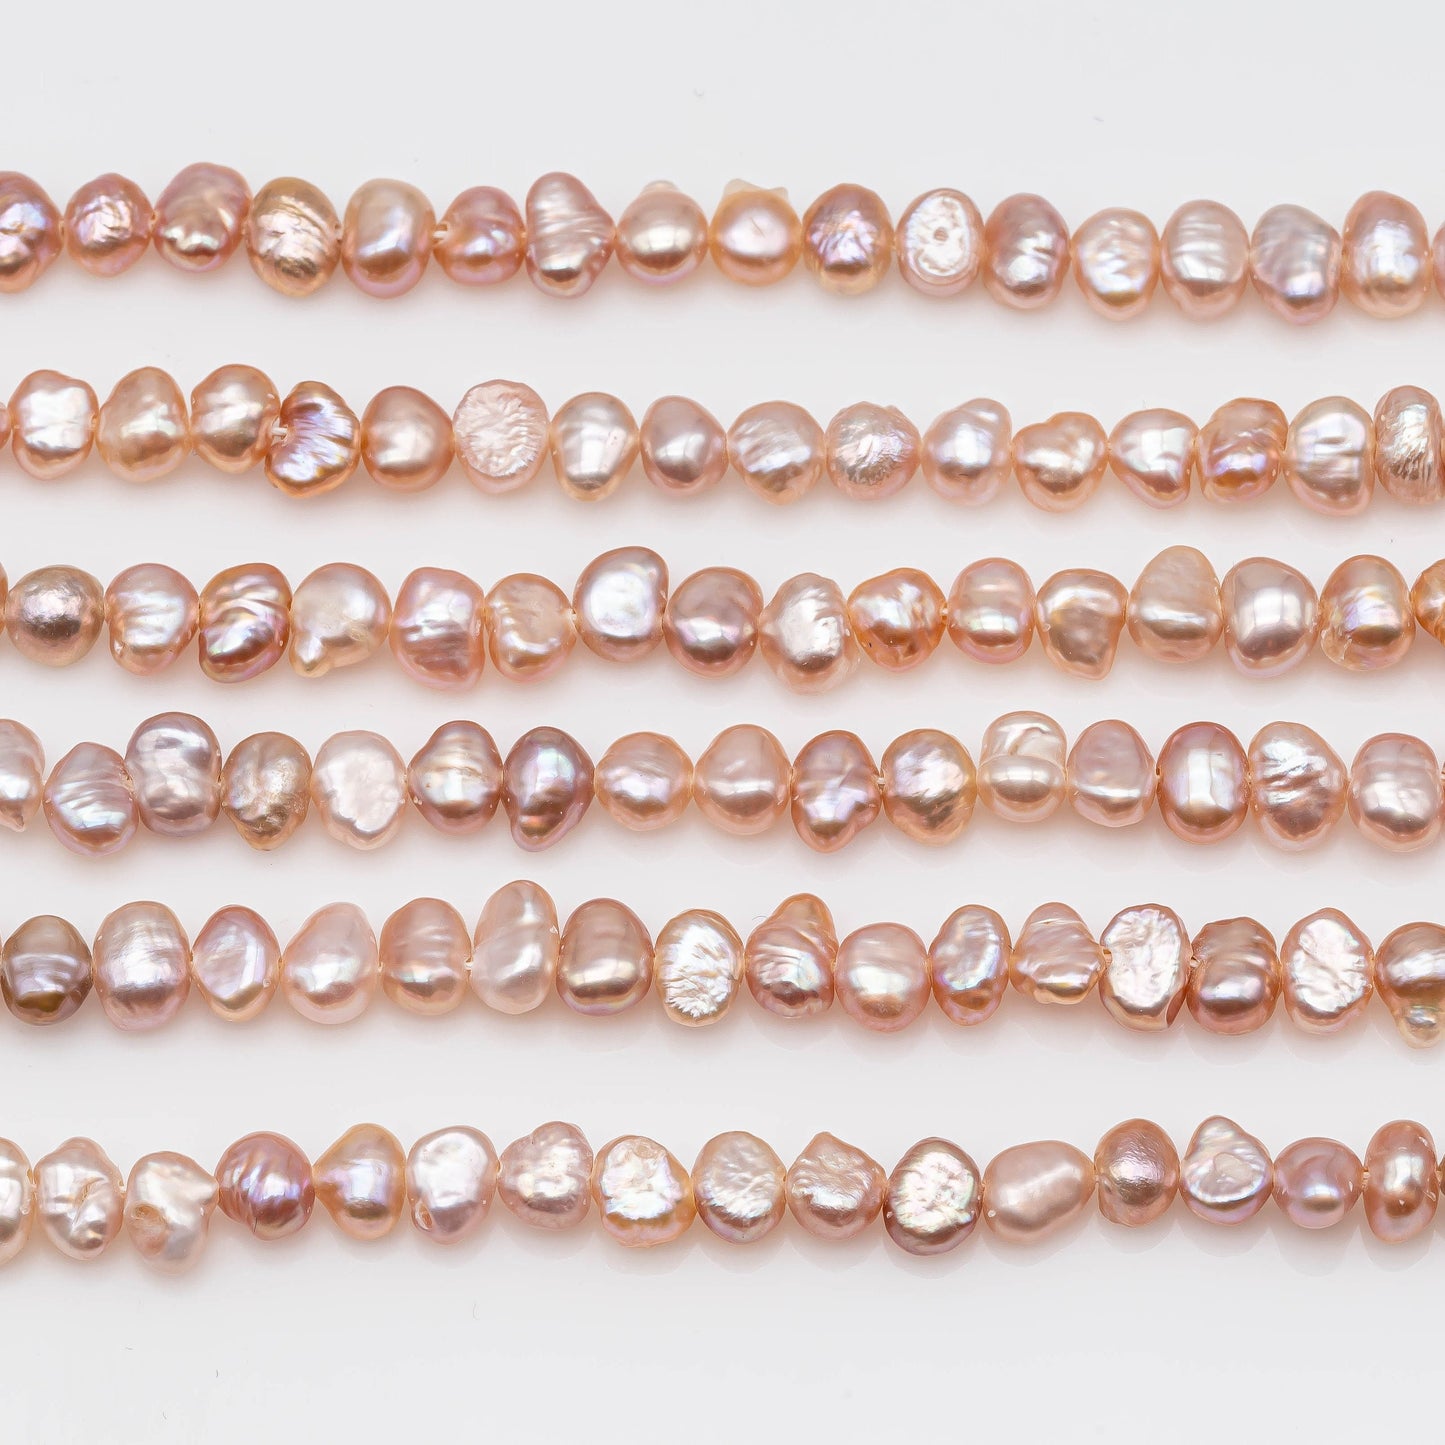 Pink Nugget Freshwater Pearl in Small Size 4-5mm Full Strand and Natural Color for Jewelry Making, SKU # 1139FW